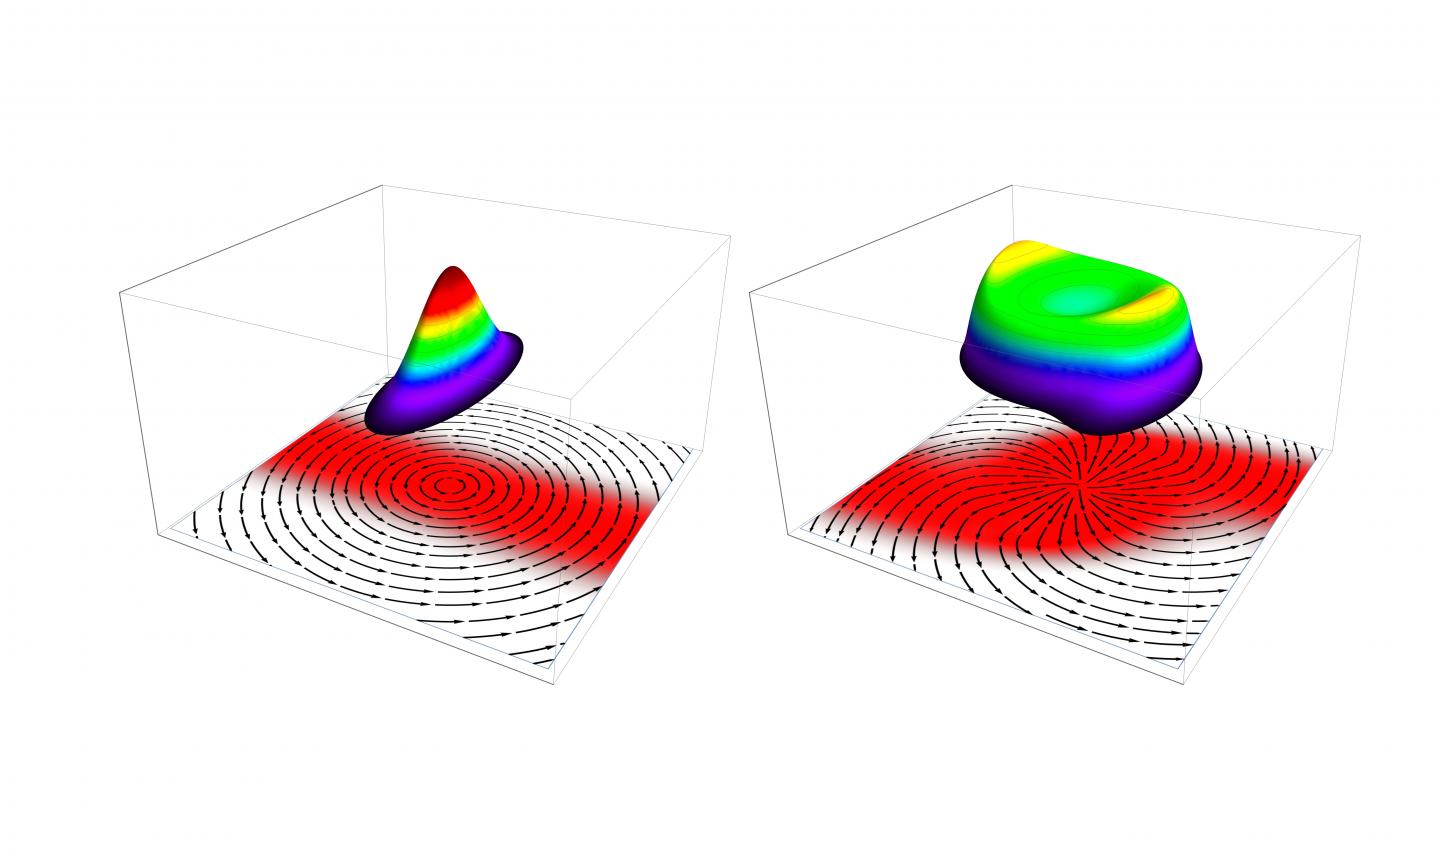 Ultrarelativistic Flows with Spin